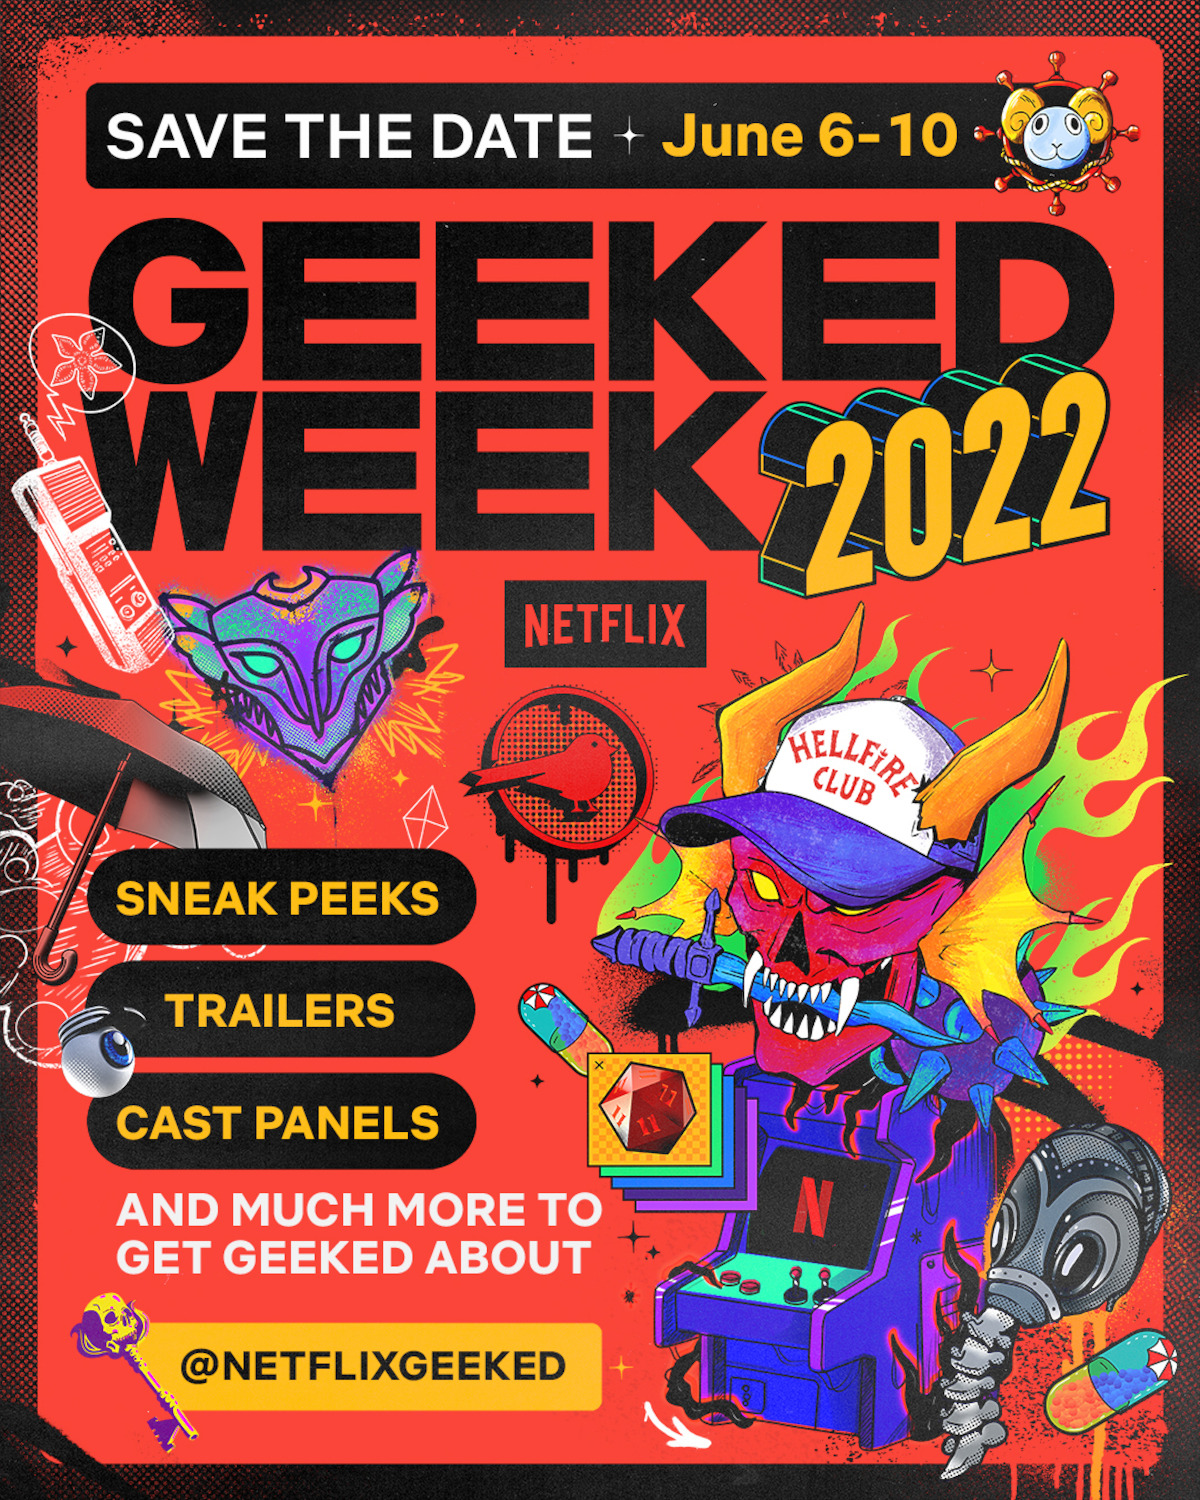 Netflix Geeked - still not over the animation from the